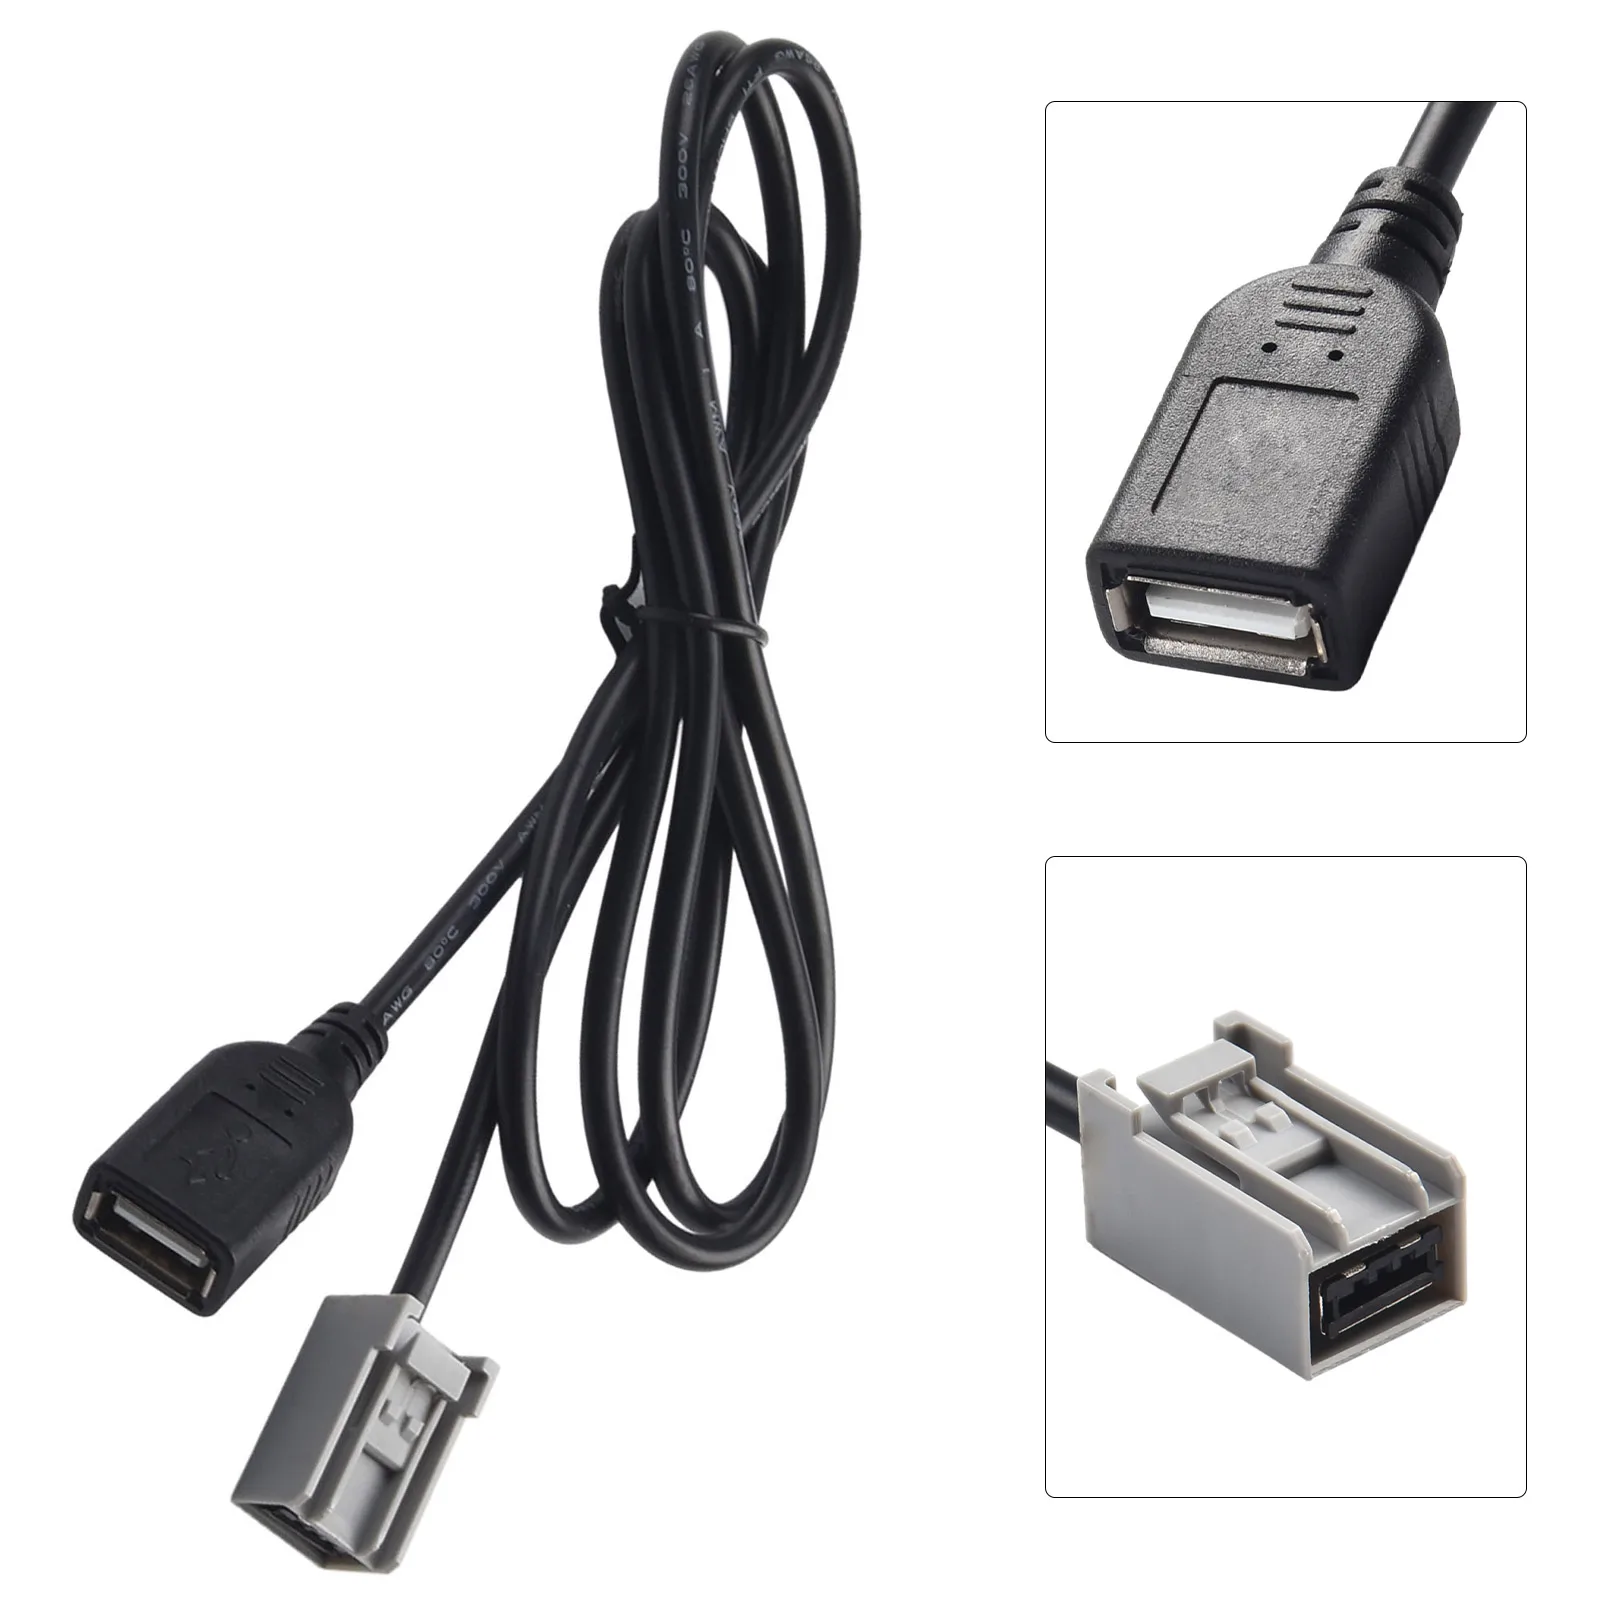 

1pcs AUX To USB Cable USB Drive Data Conversion Cable For CR-V 2009-2013 For Accord 2009-2013 For Odyssey 2009-2013 Female Cable